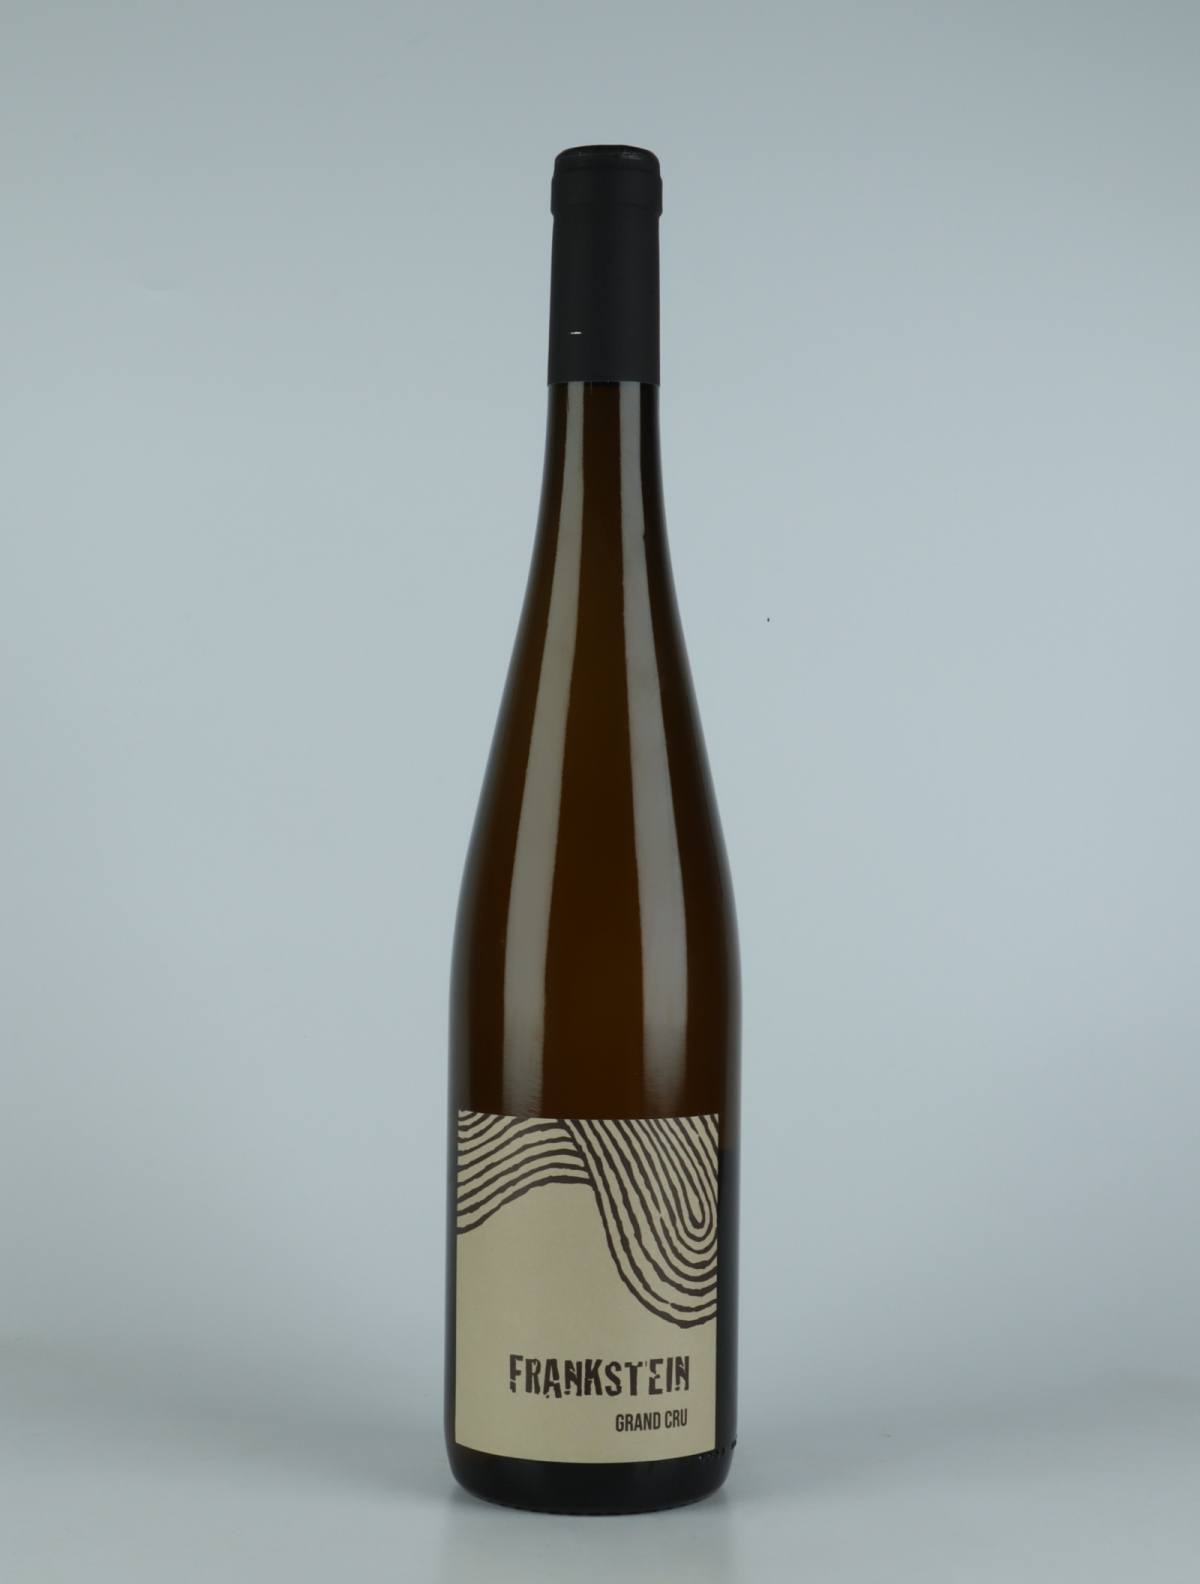 A bottle 2020 Riesling - Grand Cru Frankstein White wine from Ruhlmann Dirringer, Alsace in France